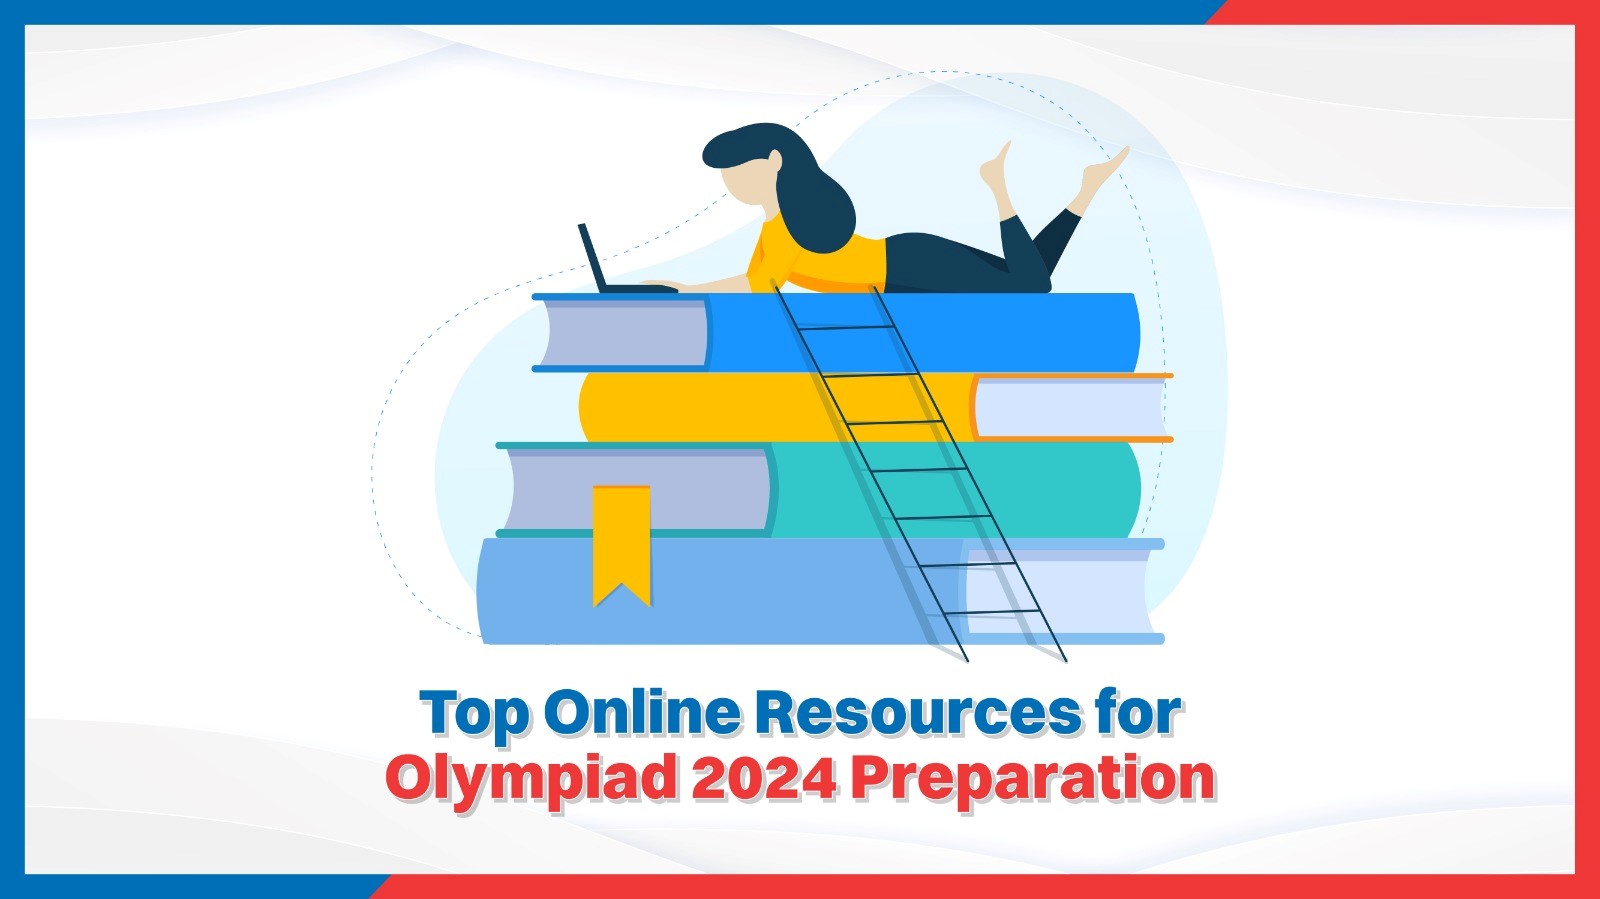 Top Online Resources for Olympiad 2024 Preparation.jpg